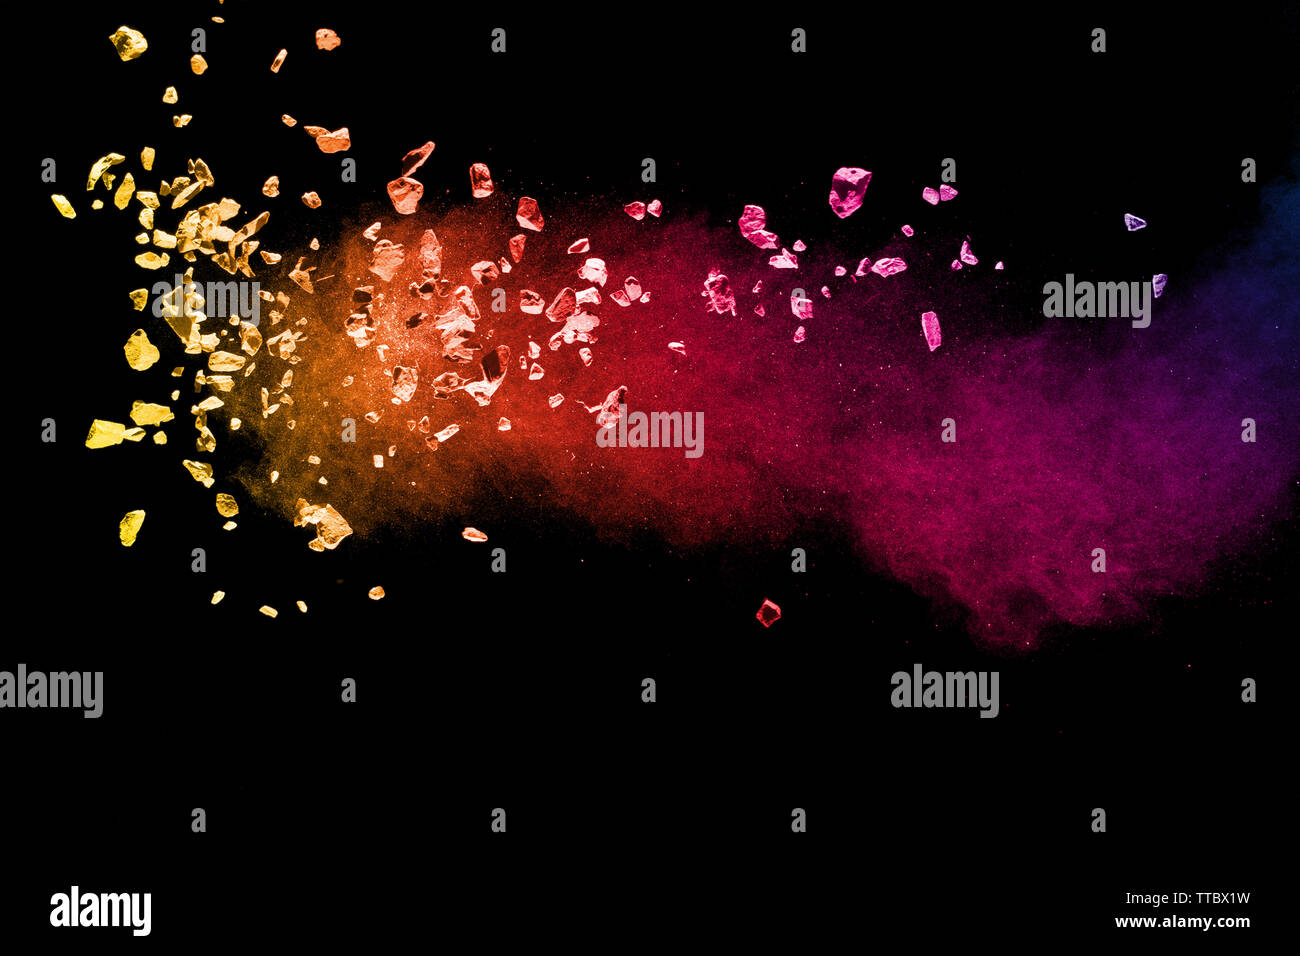 Split debris of colored stone with dust exploding against black background. Stock Photo